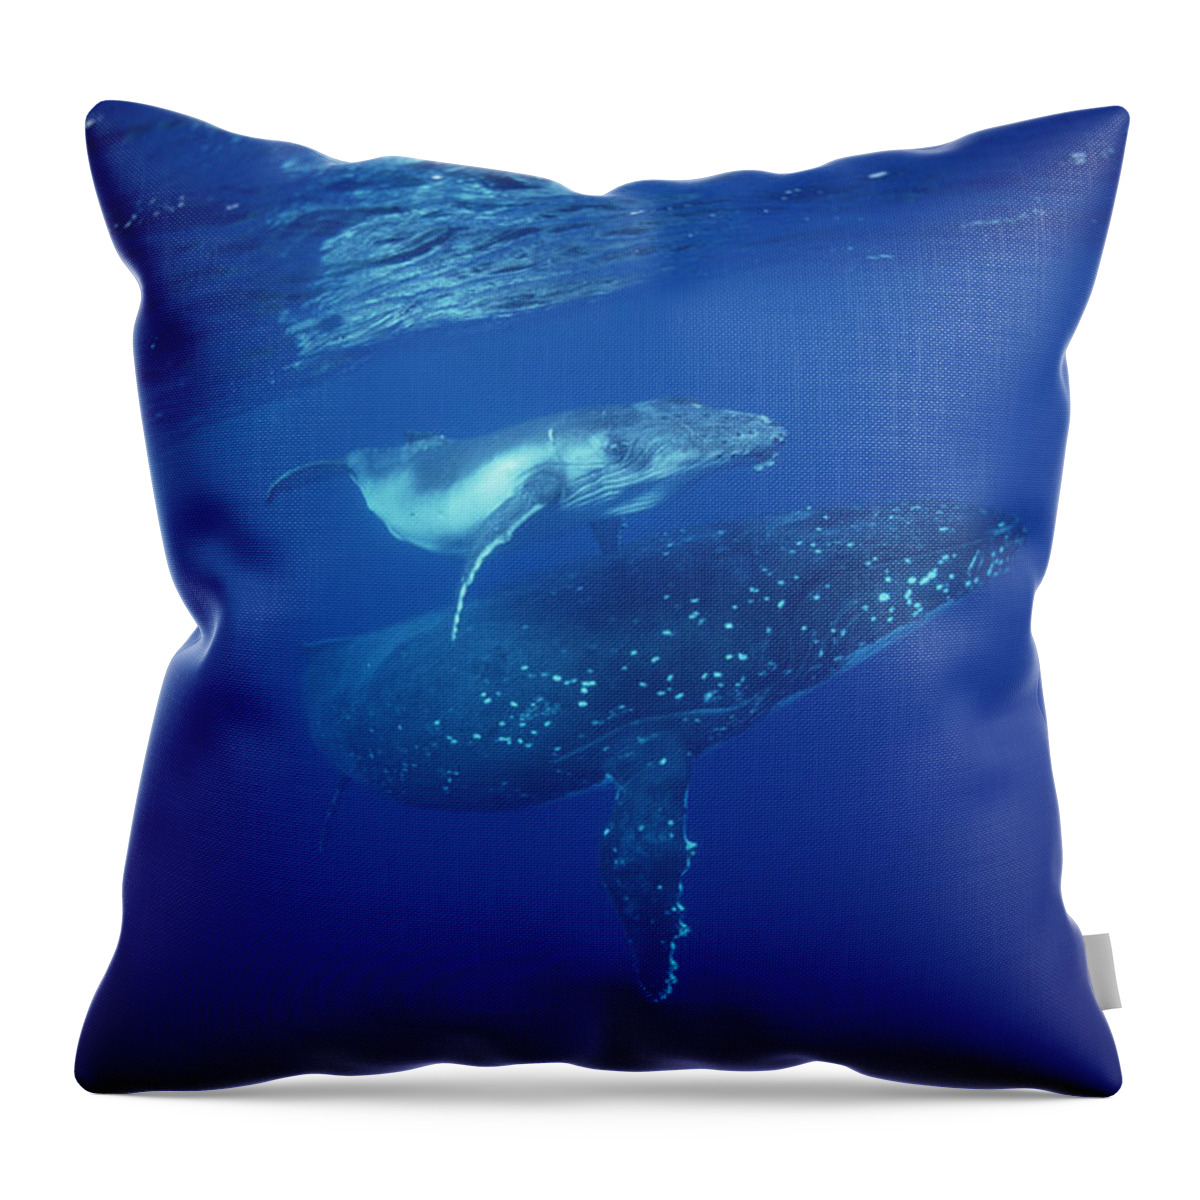 Feb0514 Throw Pillow featuring the photograph Humpback Whale Mother And Calf Tonga by Flip Nicklin